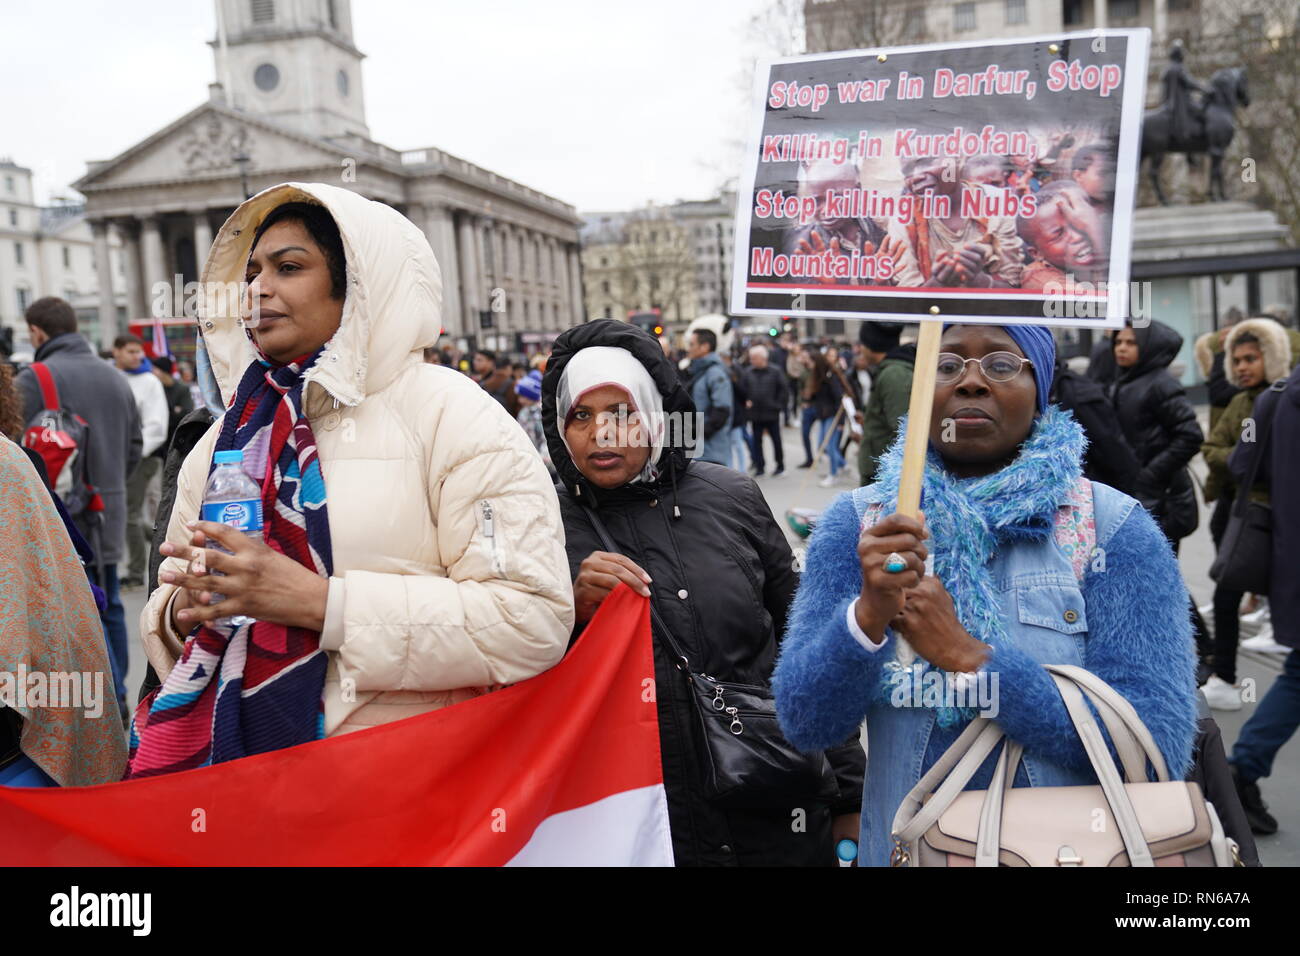 Trafalgar Square, London, UK. 16th Feb 2019. Photograph taken in central London during a protest organised by the Sudanese population in the UK in order to overthrow the Sudanese regime which has reigned for about 30 years causing civil upheaval and genocides mostly in the South Sudan which now holds its independence. The county overall has suffered from justice ranging from hyperinflation to unlawful imprisonment. Credit: Ioannis Toutoungi/Alamy Live News Stock Photo